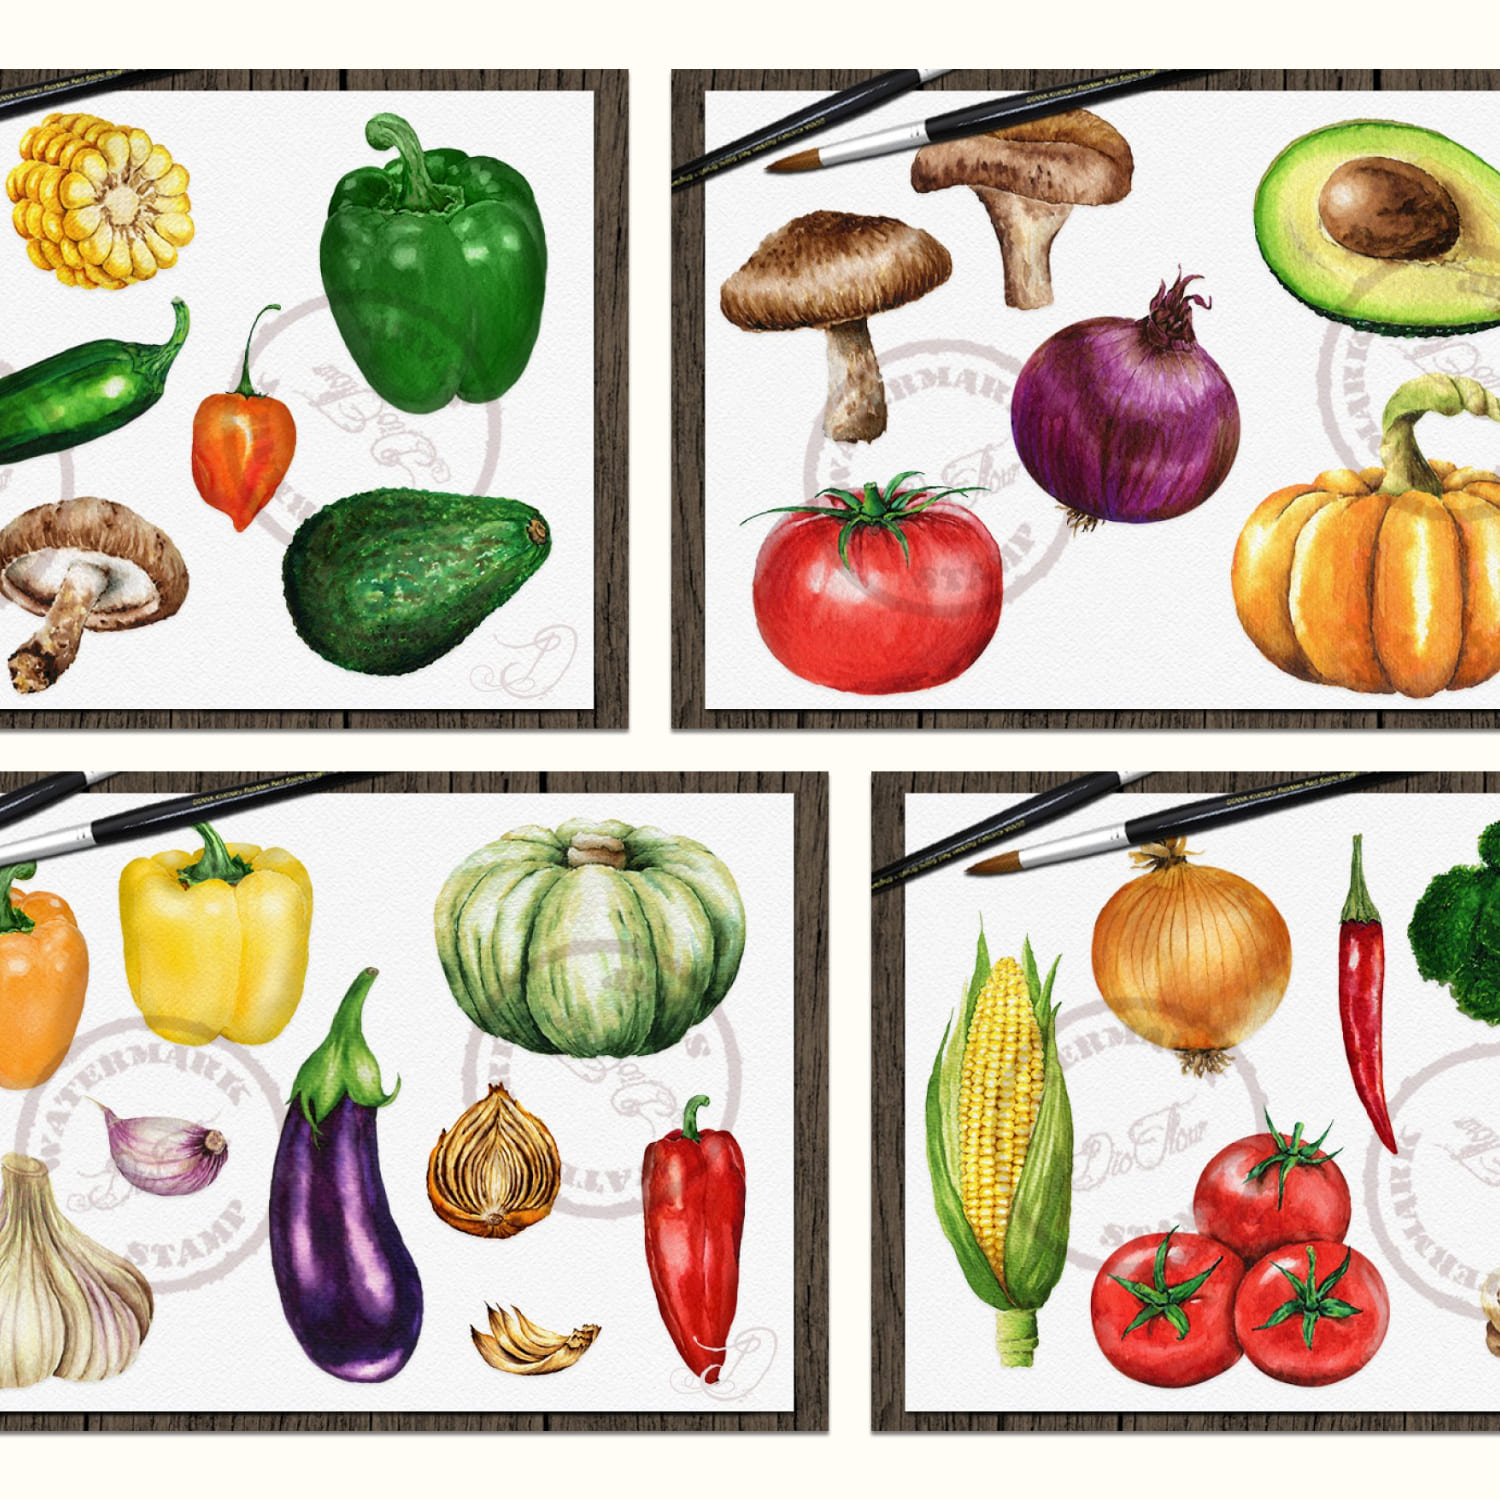 Vegetable Watercolor Illusrtation created by DioFlow.